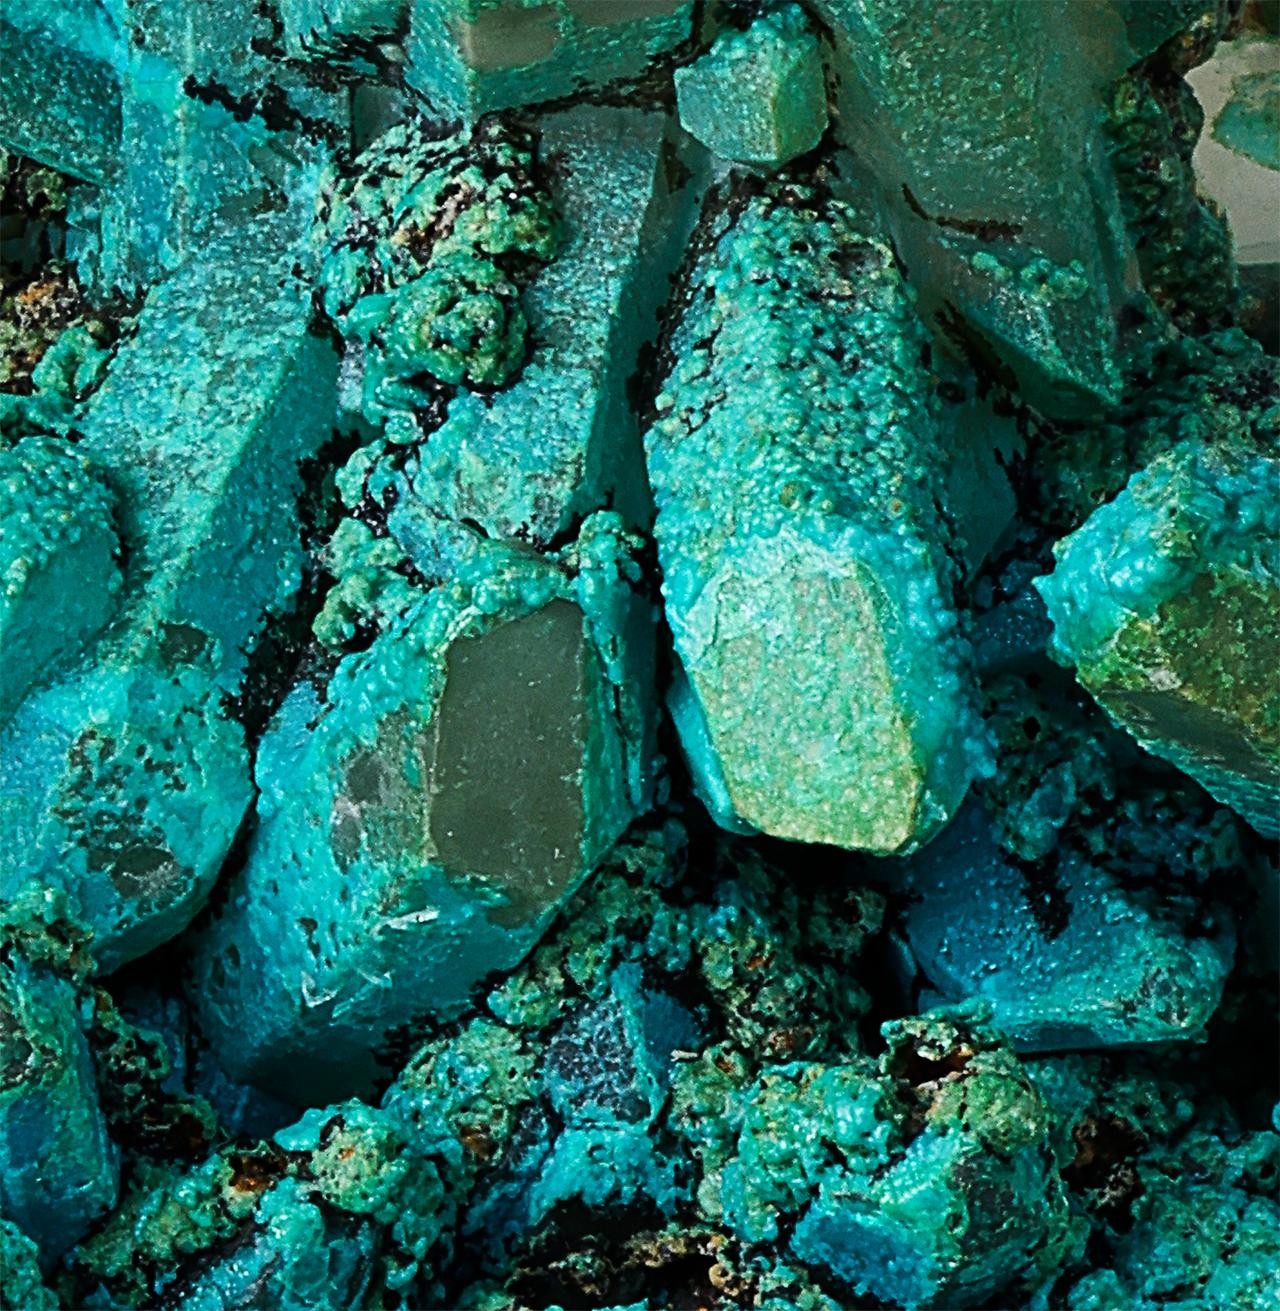 Chrysocolla on Quartz, Tentadora Mine, Julcani Dist., Angaraes Prov., Huancavelica, Peru

Richly colored blue and green chrysocolla has coated clear quartz in this unique small discovery made in 2018. There were but a few examples of this